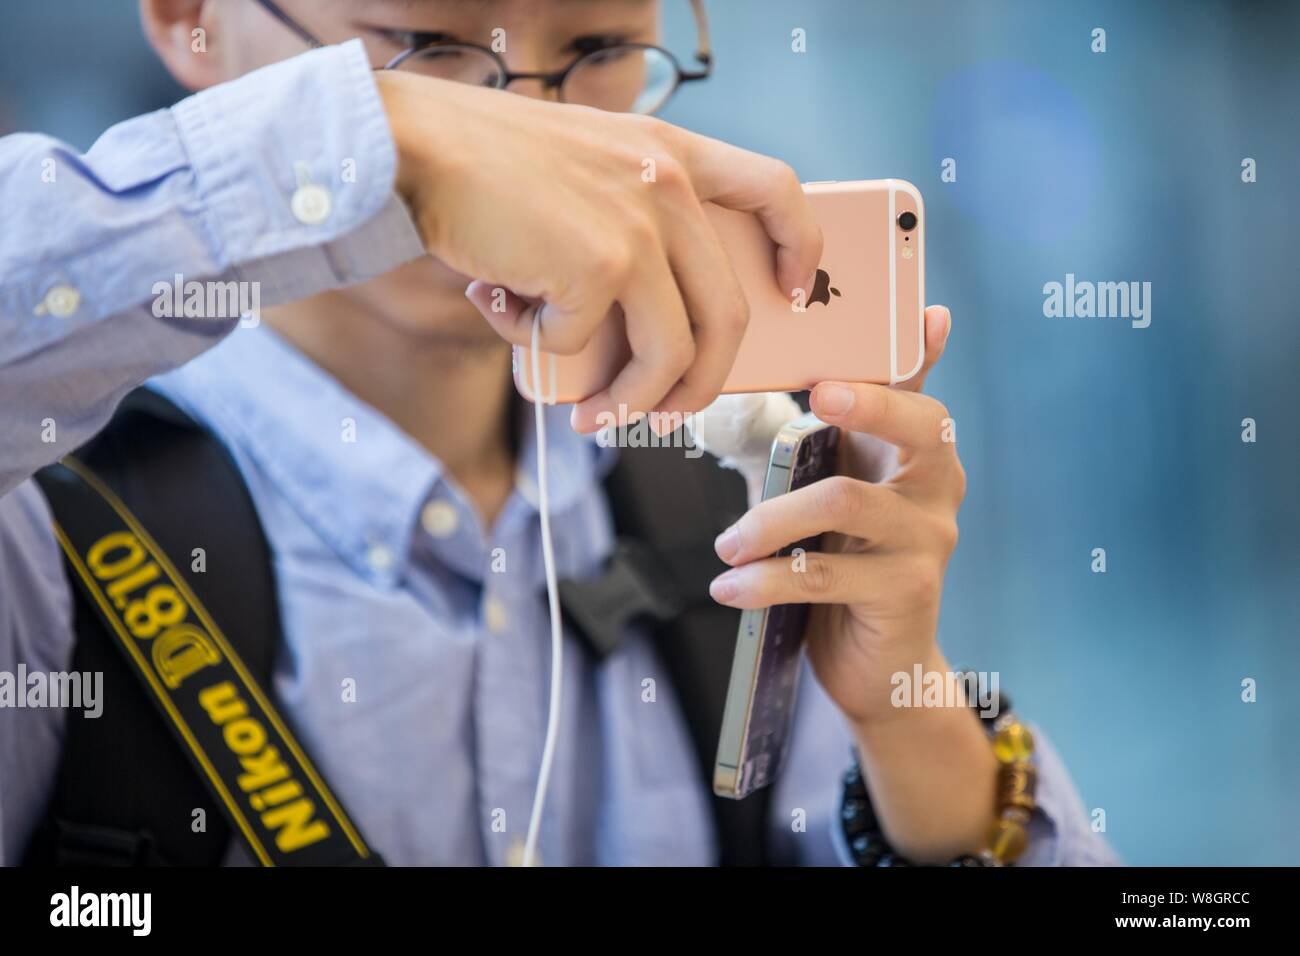 A customer tries out a rose gold iPhone 6s smartphone at the Apple Store near the West Lake in Hangzhou city, east China's Zhejiang province, 25 Septe Stock Photo